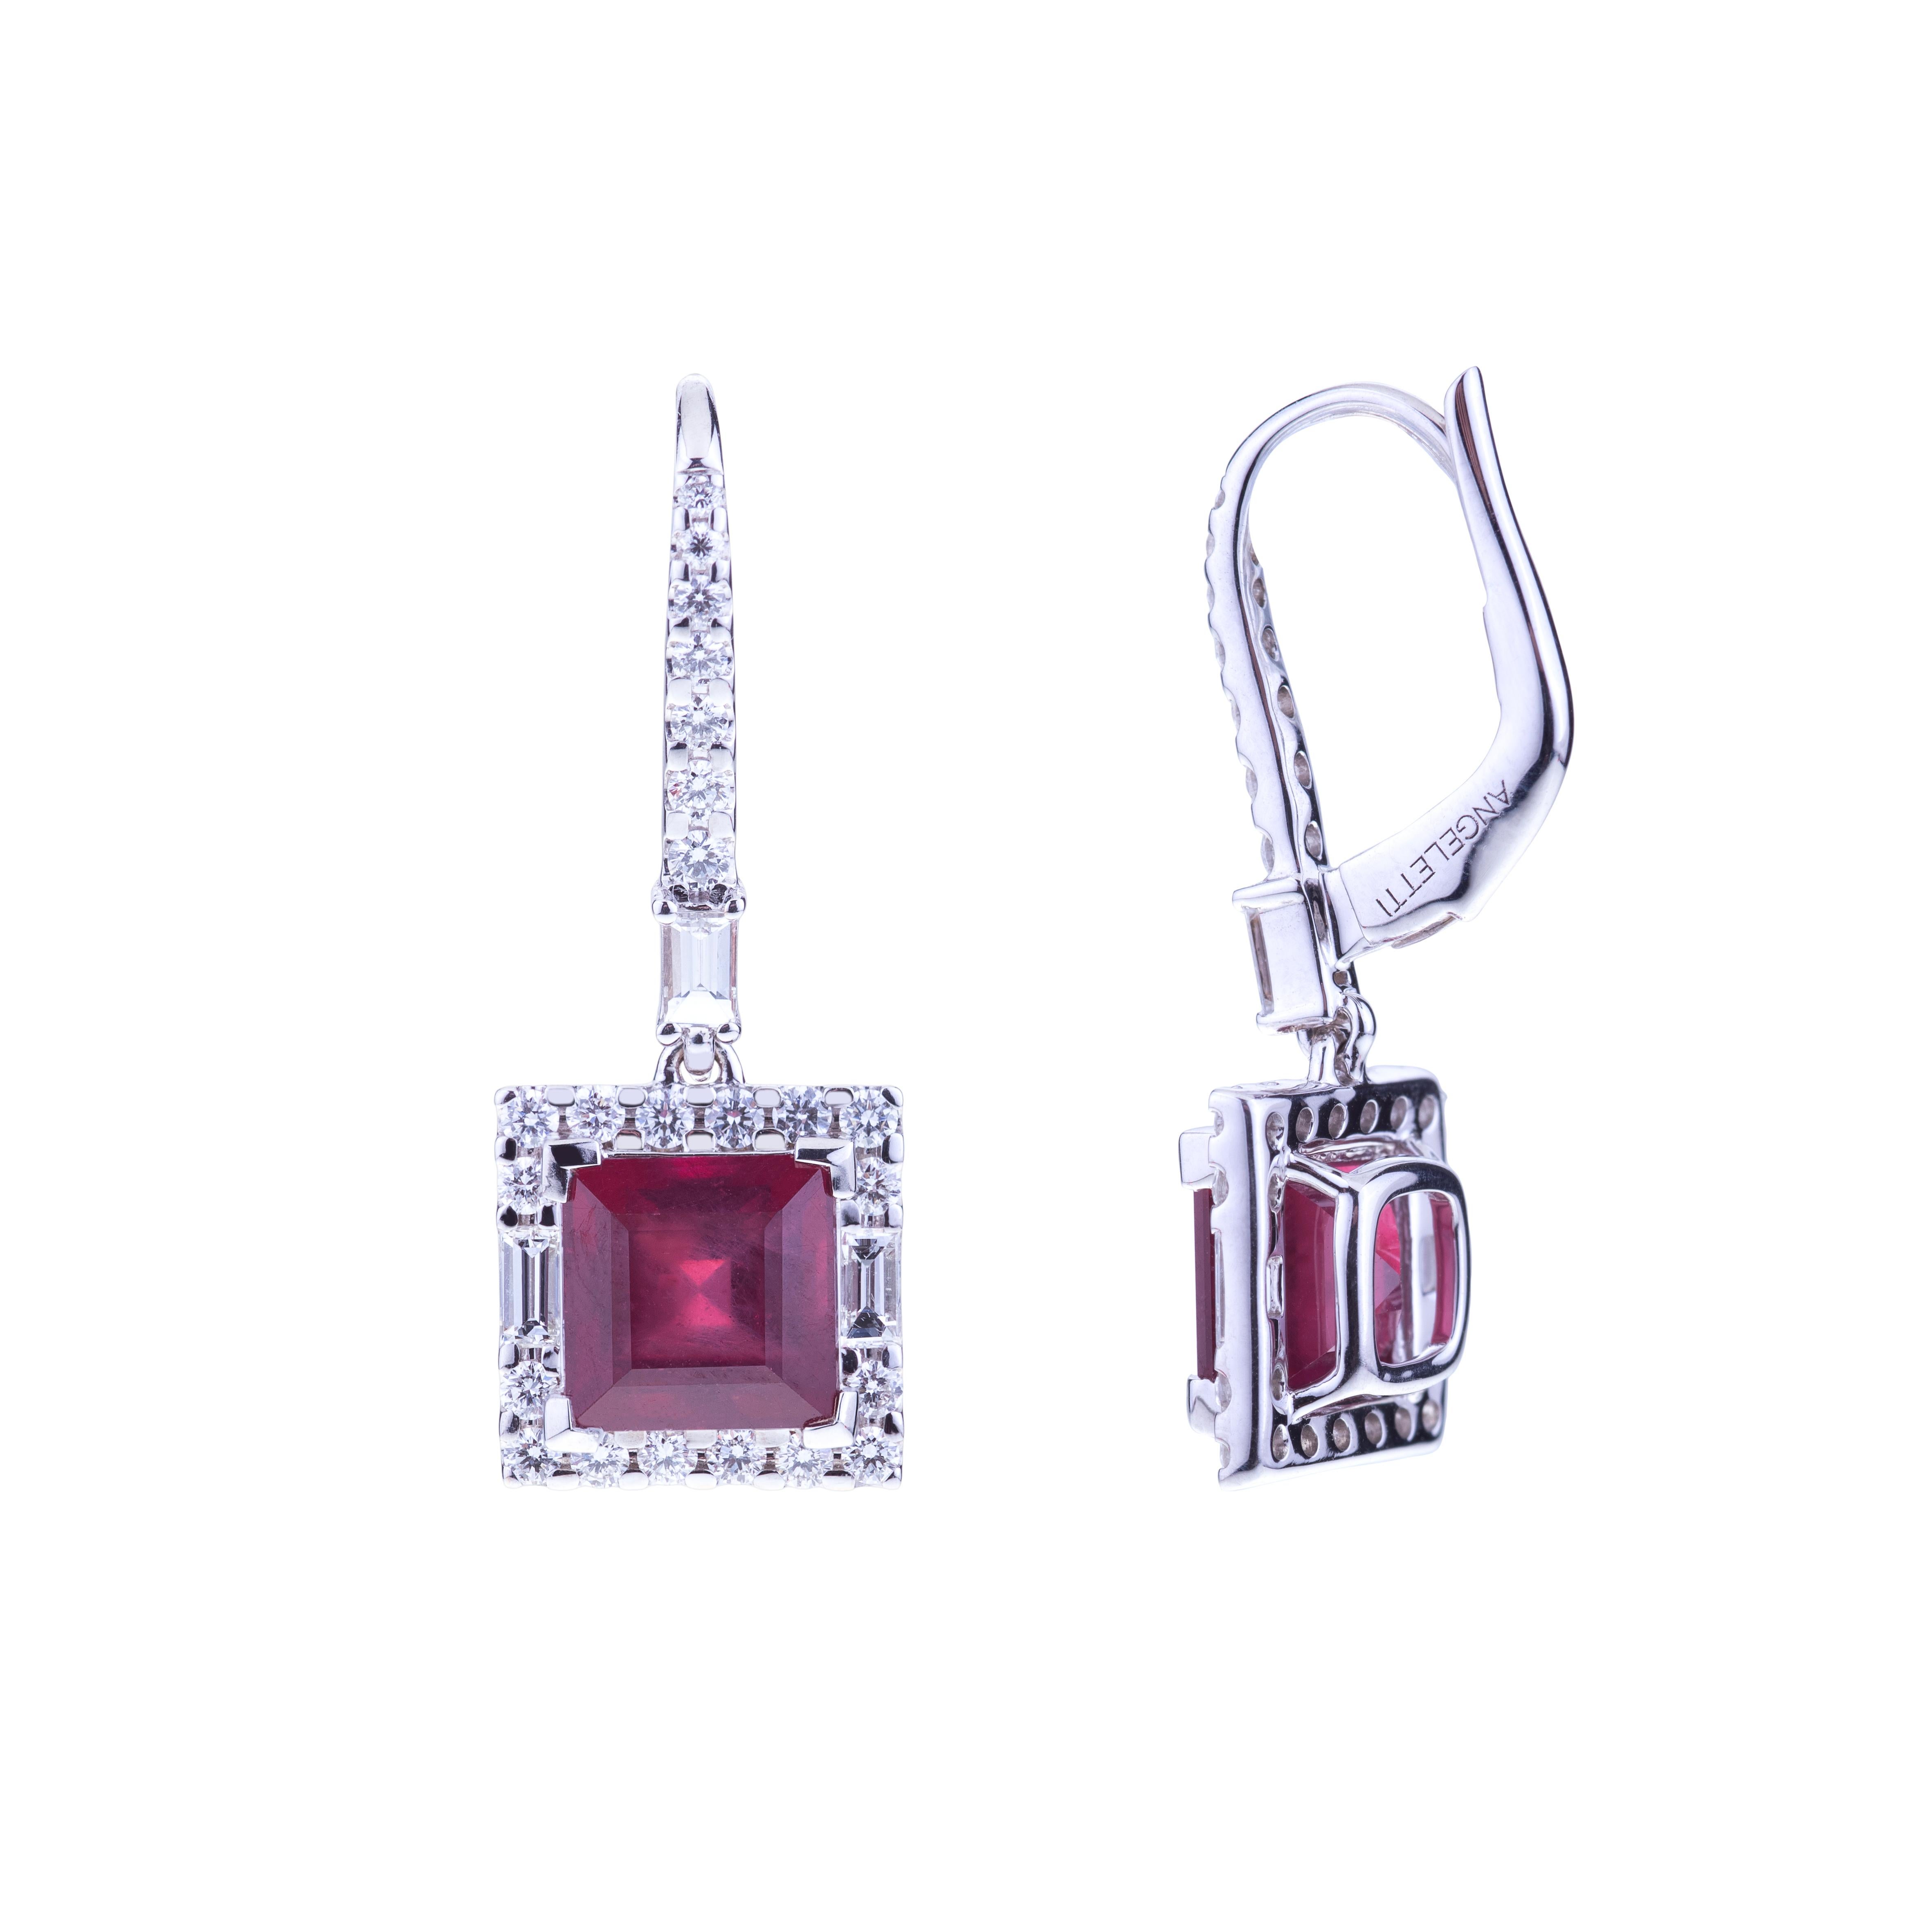 Striking Faceted Squared Ruby Earrings with a Royal Symmetry of Diamonds setting.
The Shape, albeit simple, refers to the Jewels Made by the Art Déco Masters, a Sophisticated Creation with Chromatic Contrasts, in particular Between the Red and the